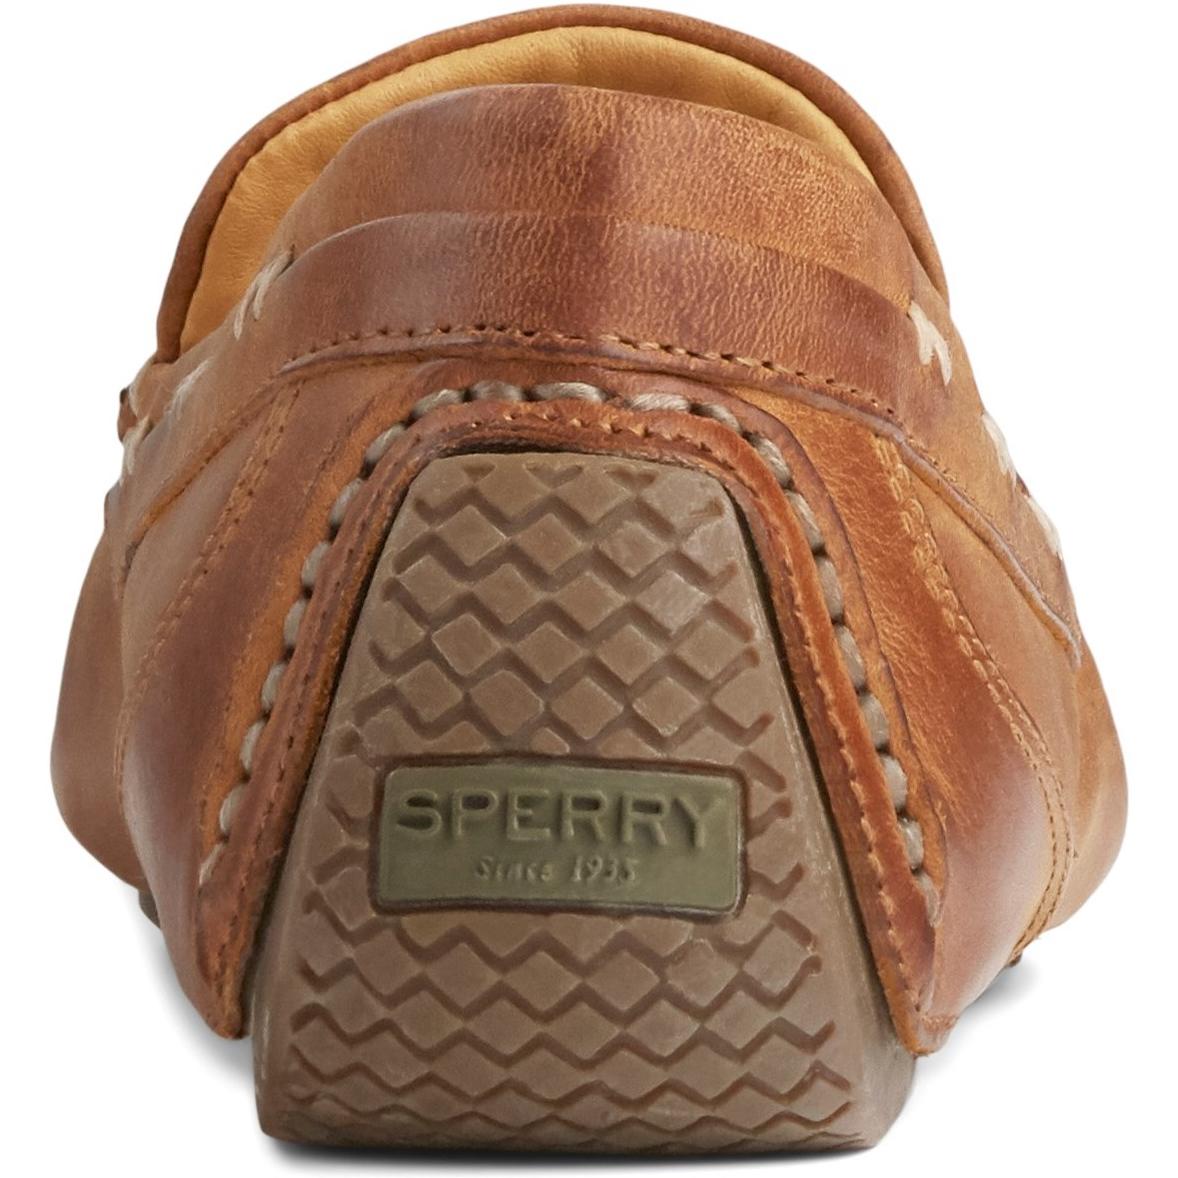 Sperry Gold Cup Harpswell Driver Loafer Shoes